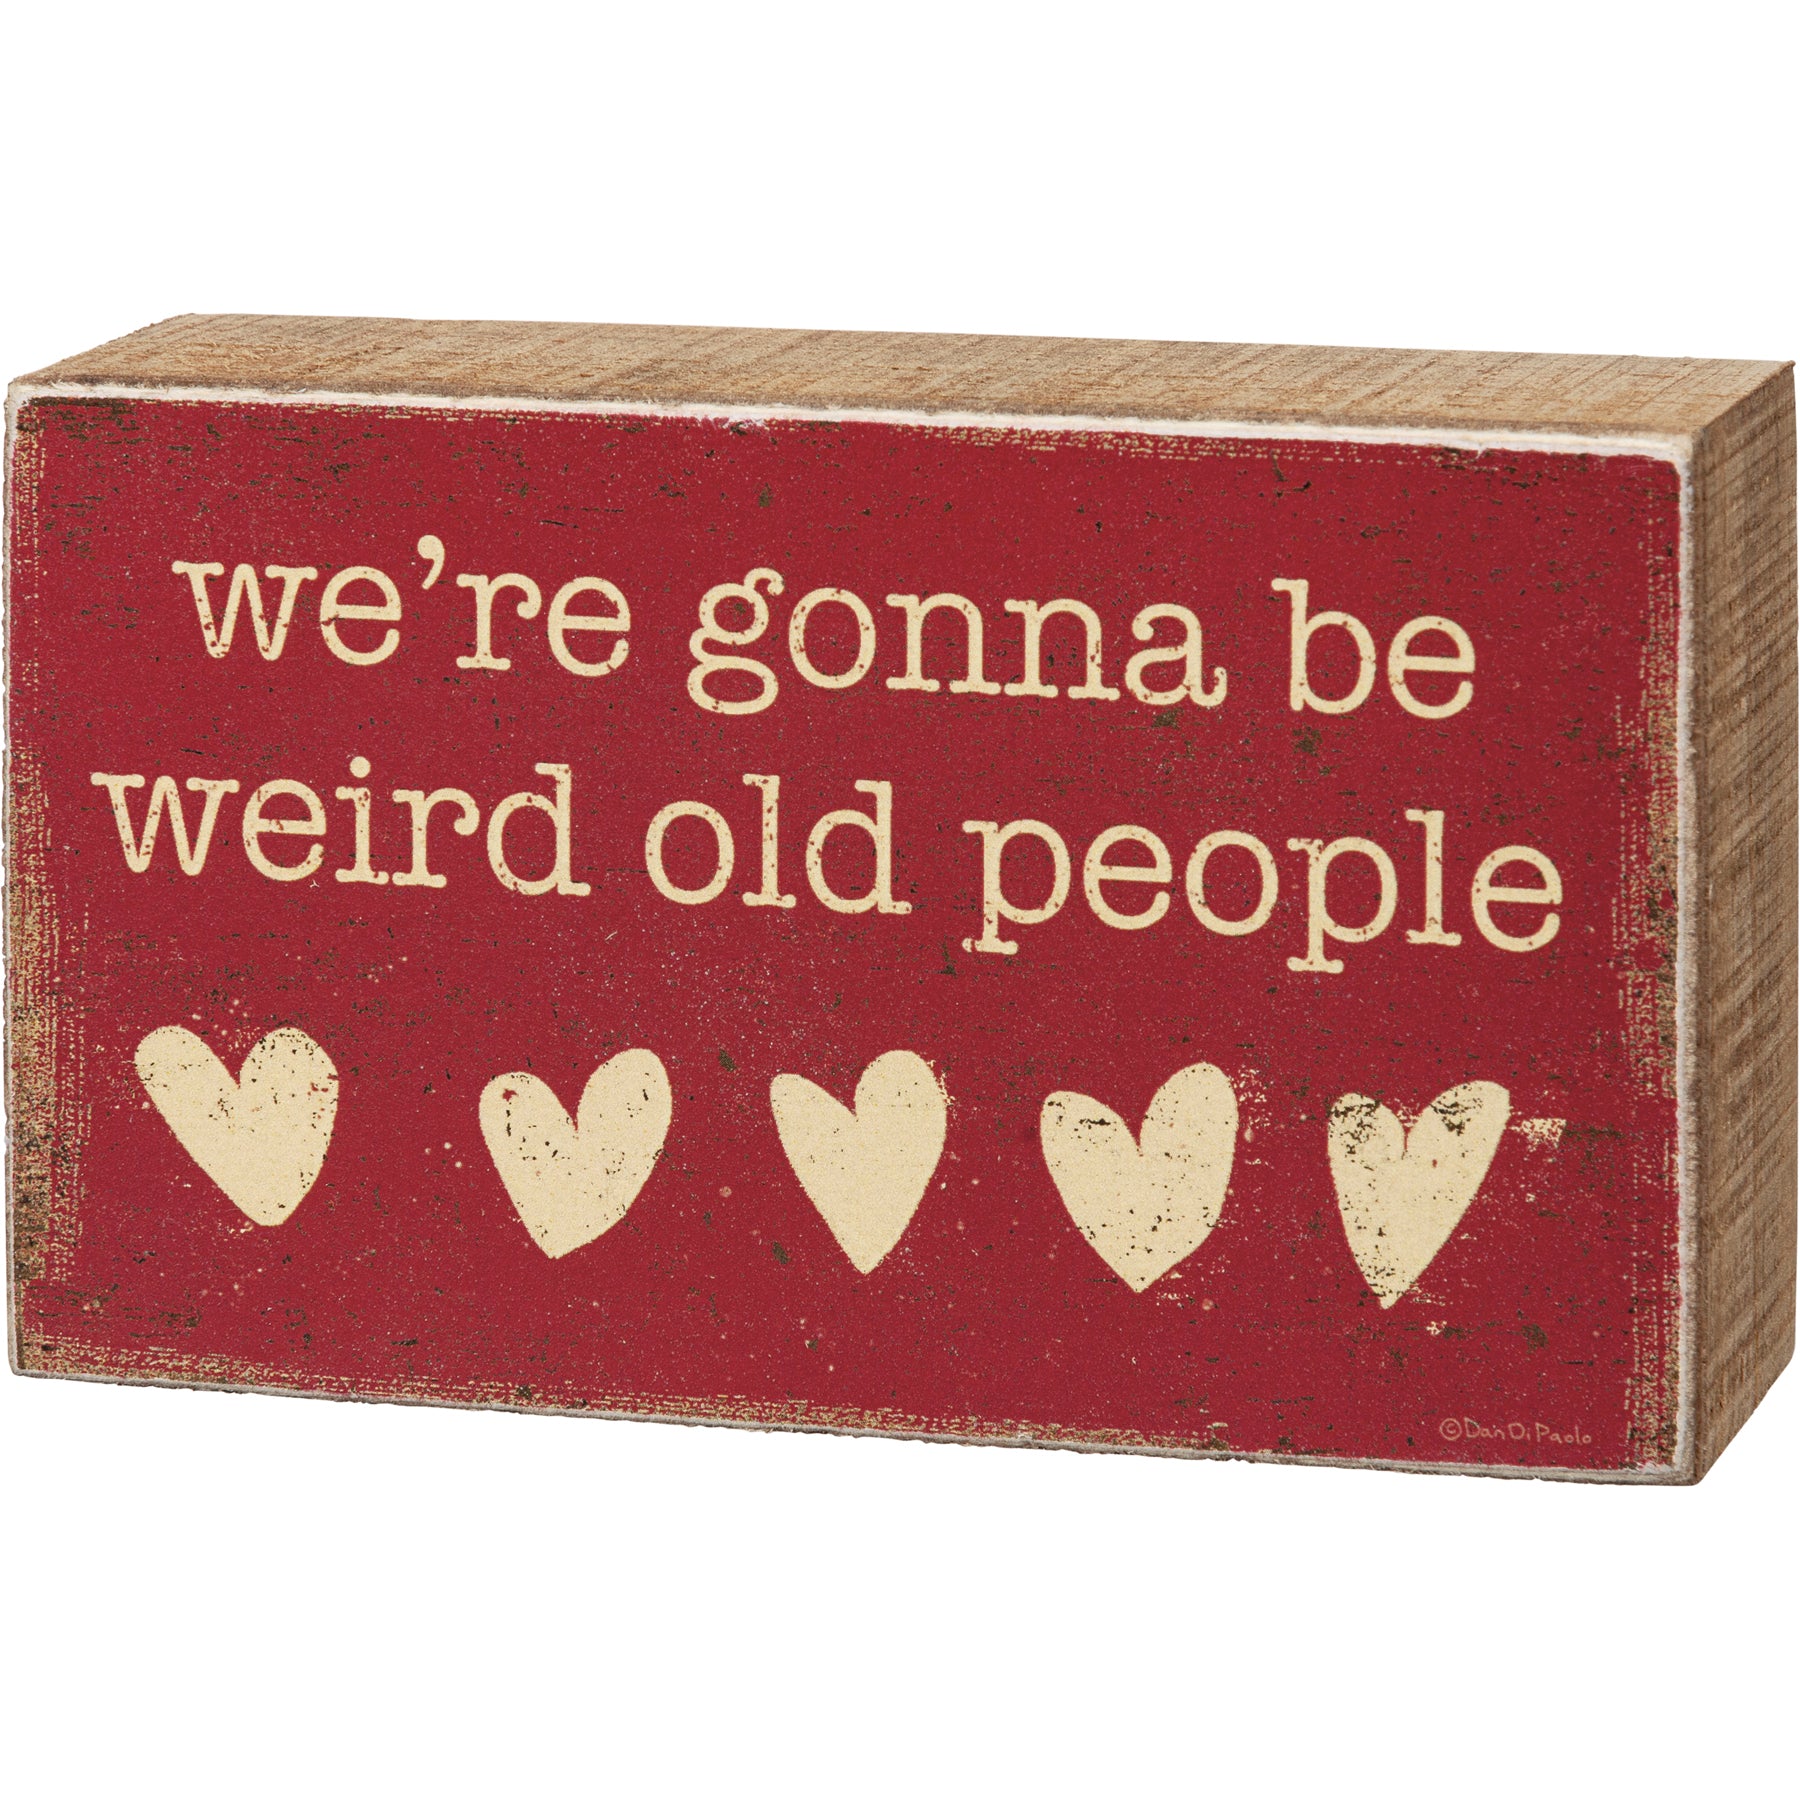 Weird Old People Box